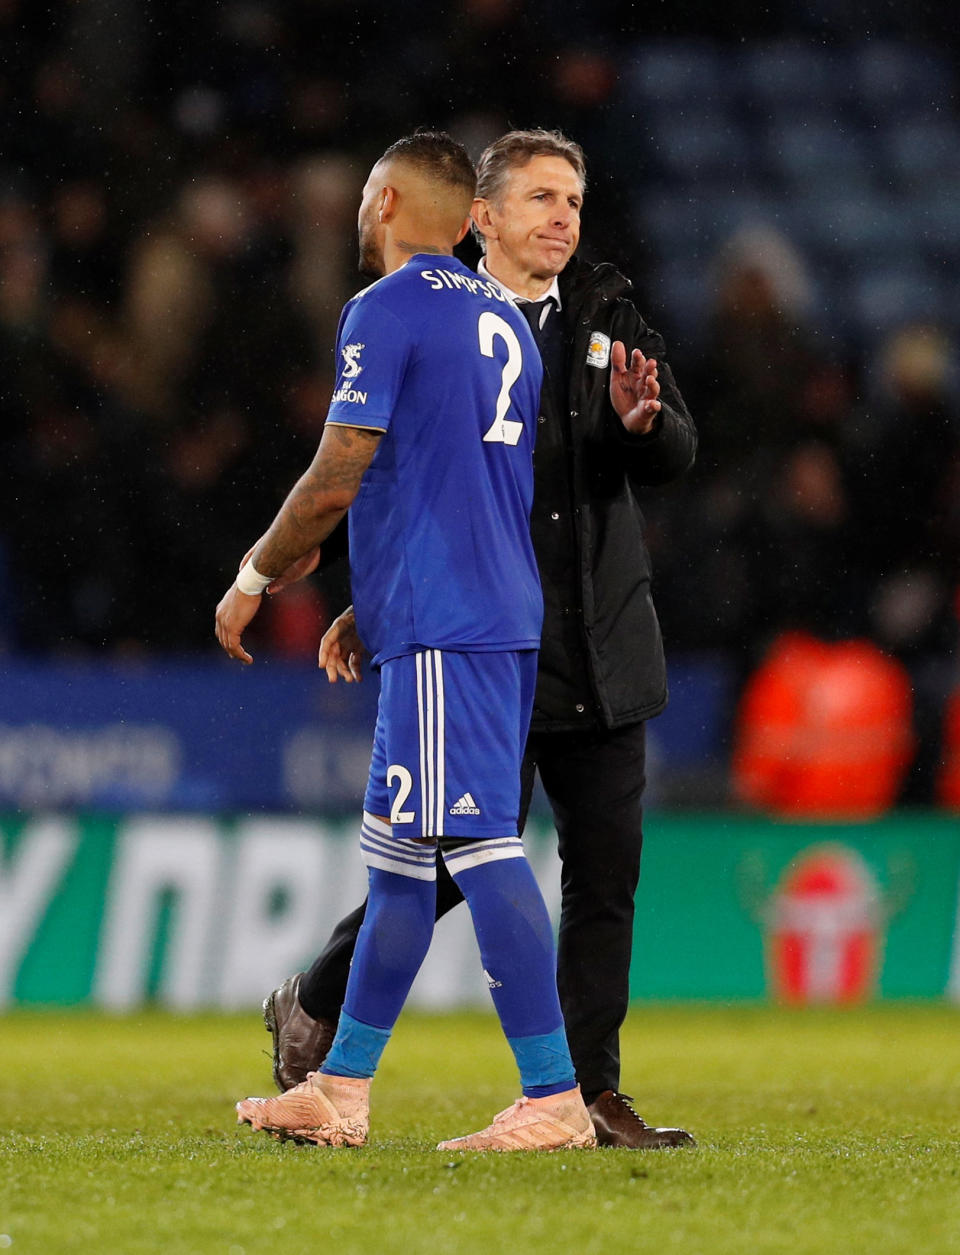 Soccer Football – Carabao Cup Quarter-Final – Leicester City v Manchester City – King Power Stadium, Leicester, Britain – December 18, 2018 Leicester City manager Claude Puel and Danny Simpson react after the match REUTERS/Darren Staples EDITORIAL USE ONLY. No use with unauthorized audio, video, data, fixture lists, club/league logos or “live” services. Online in-match use limited to 75 images, no video emulation. No use in betting, games or single club/league/player publications. Please contact your account representative for further details.